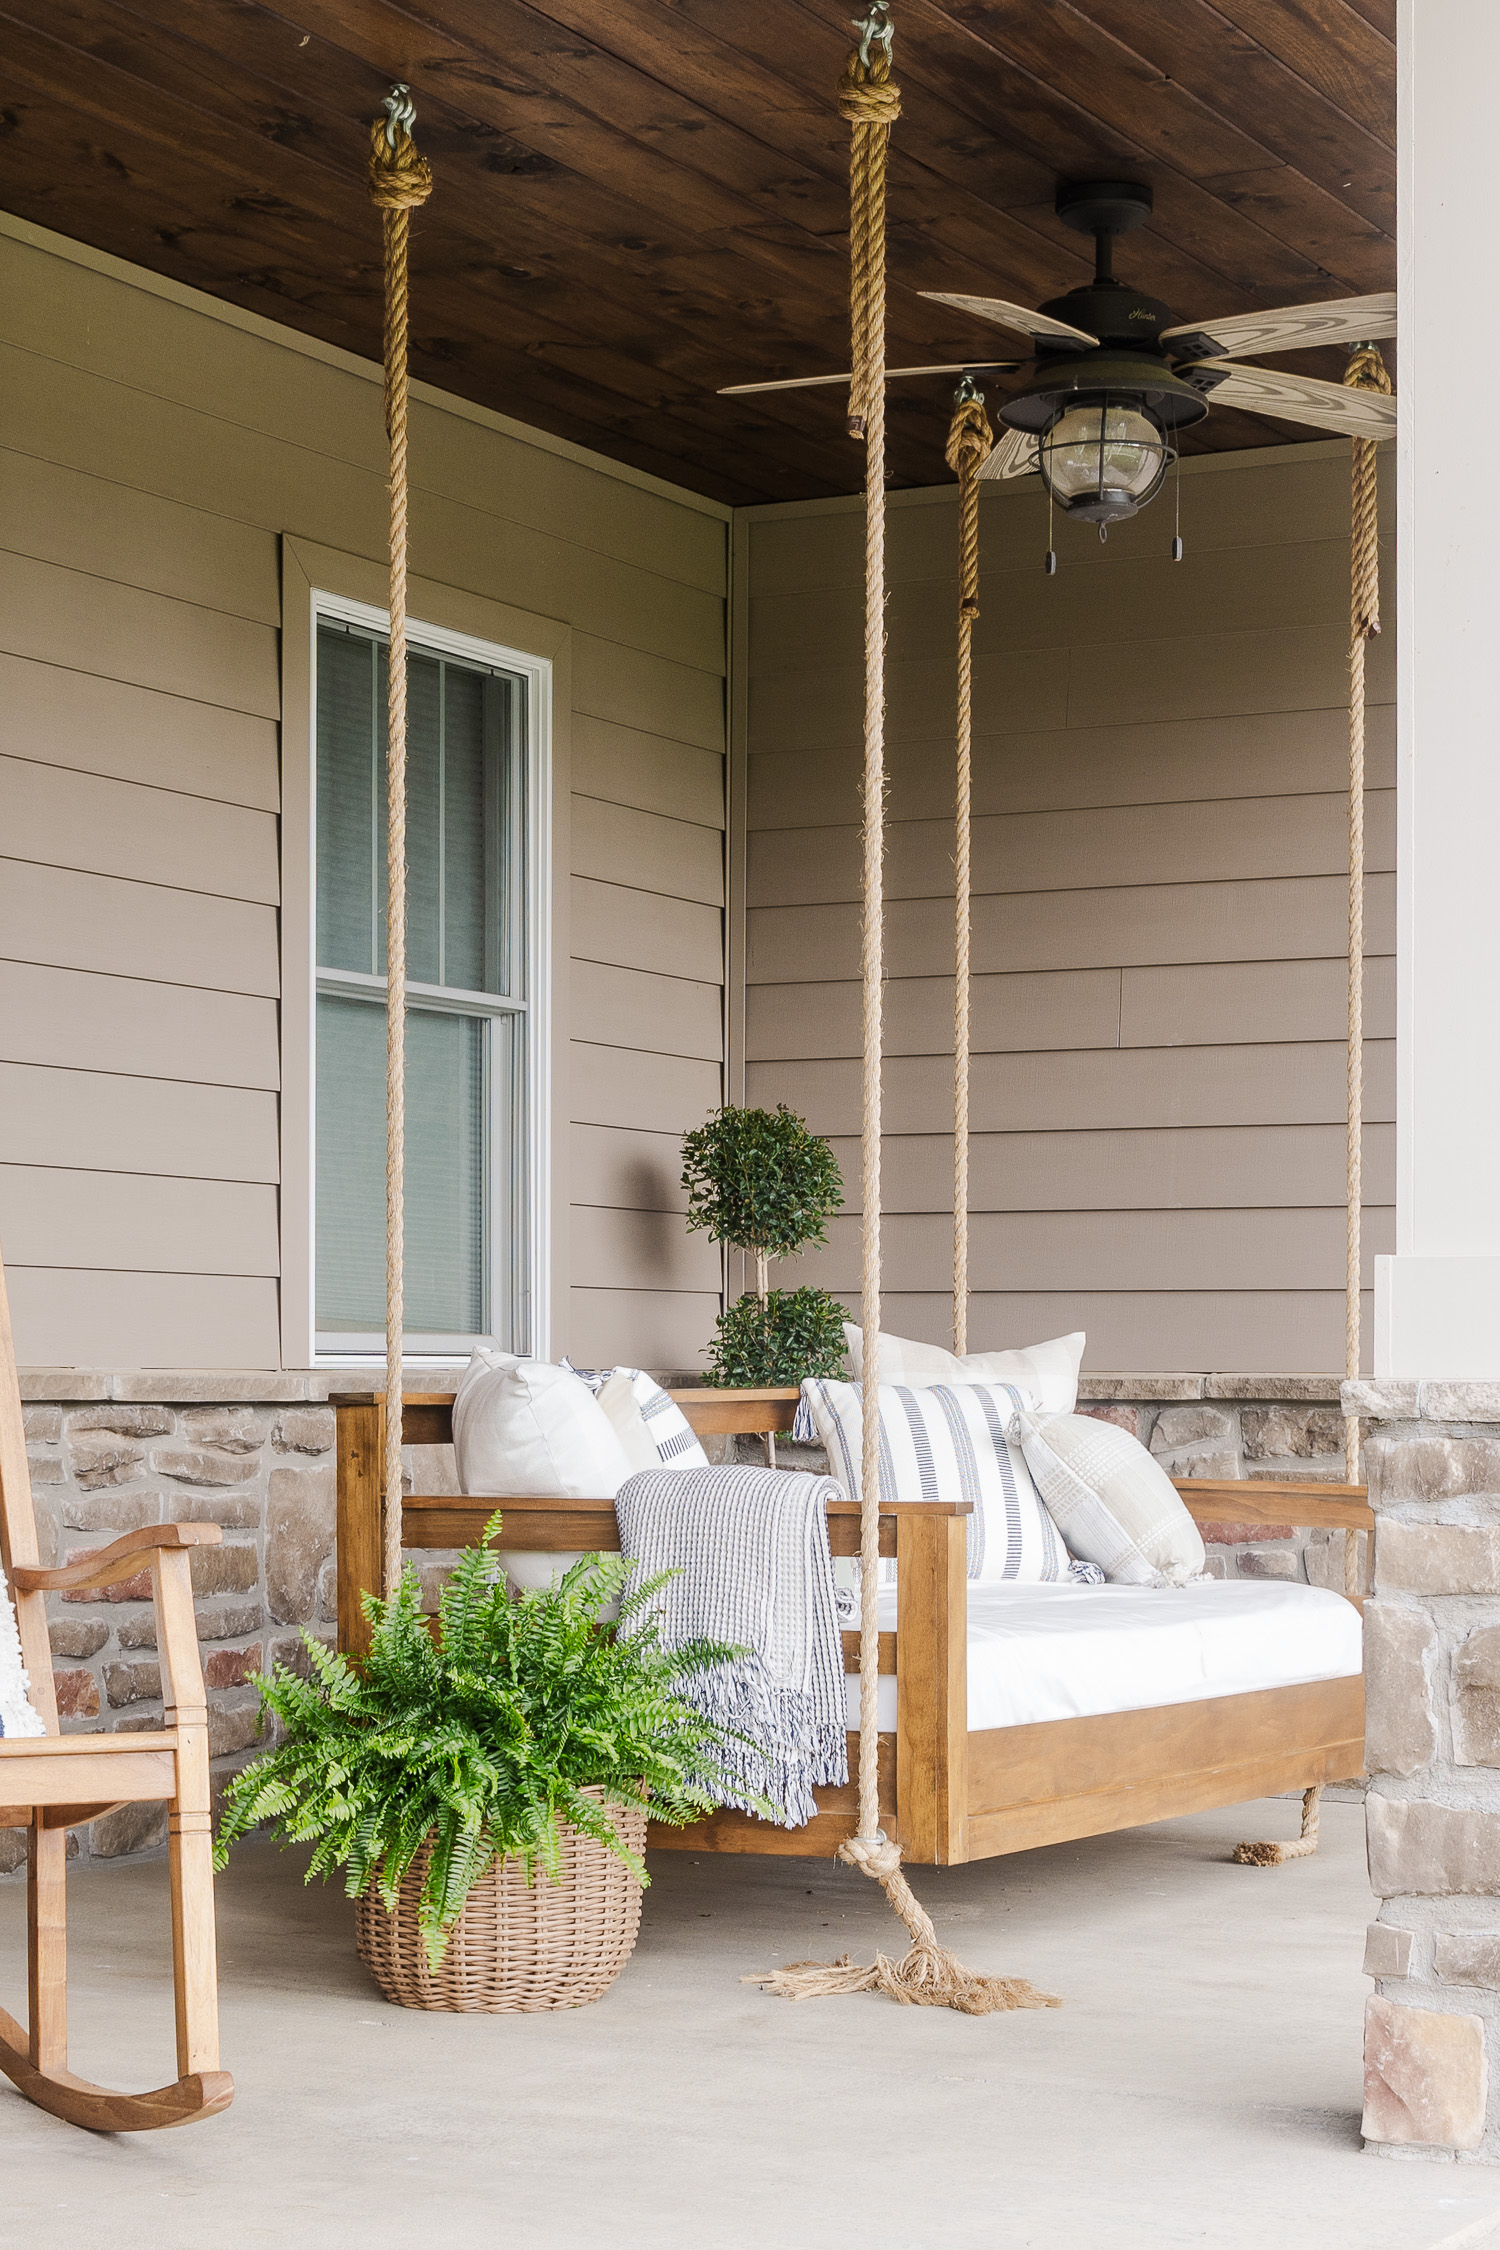 porch swing bed on patio with fern, pillows and blanket